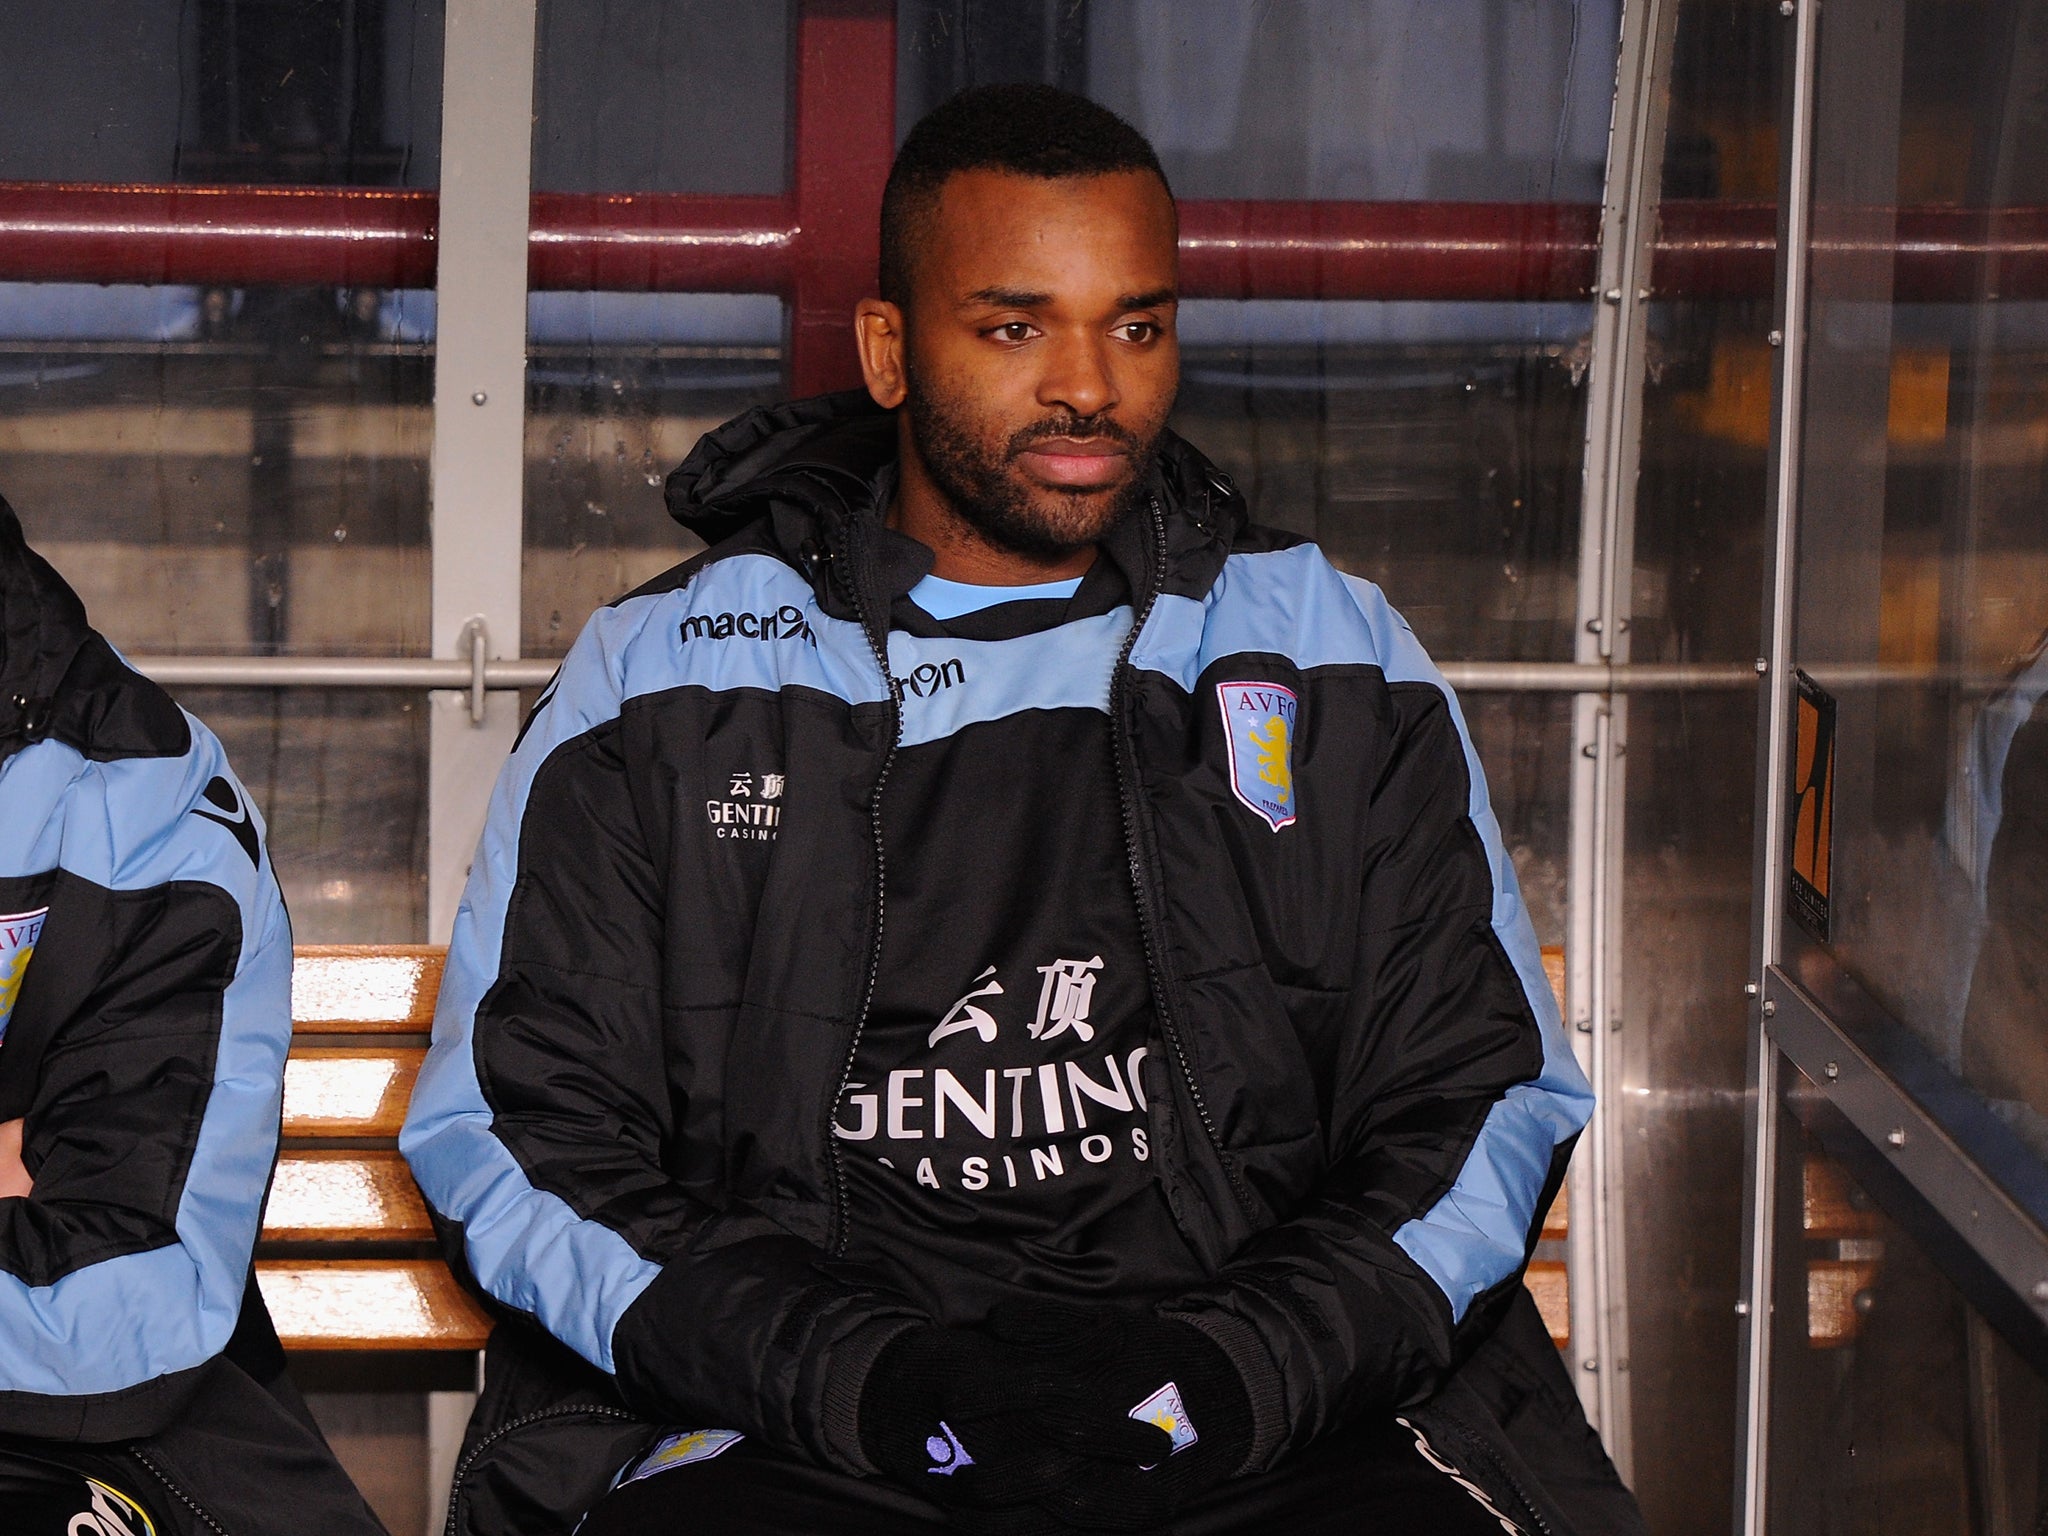 Darren Bent has remained largely on the Aston Villa bench over the last season